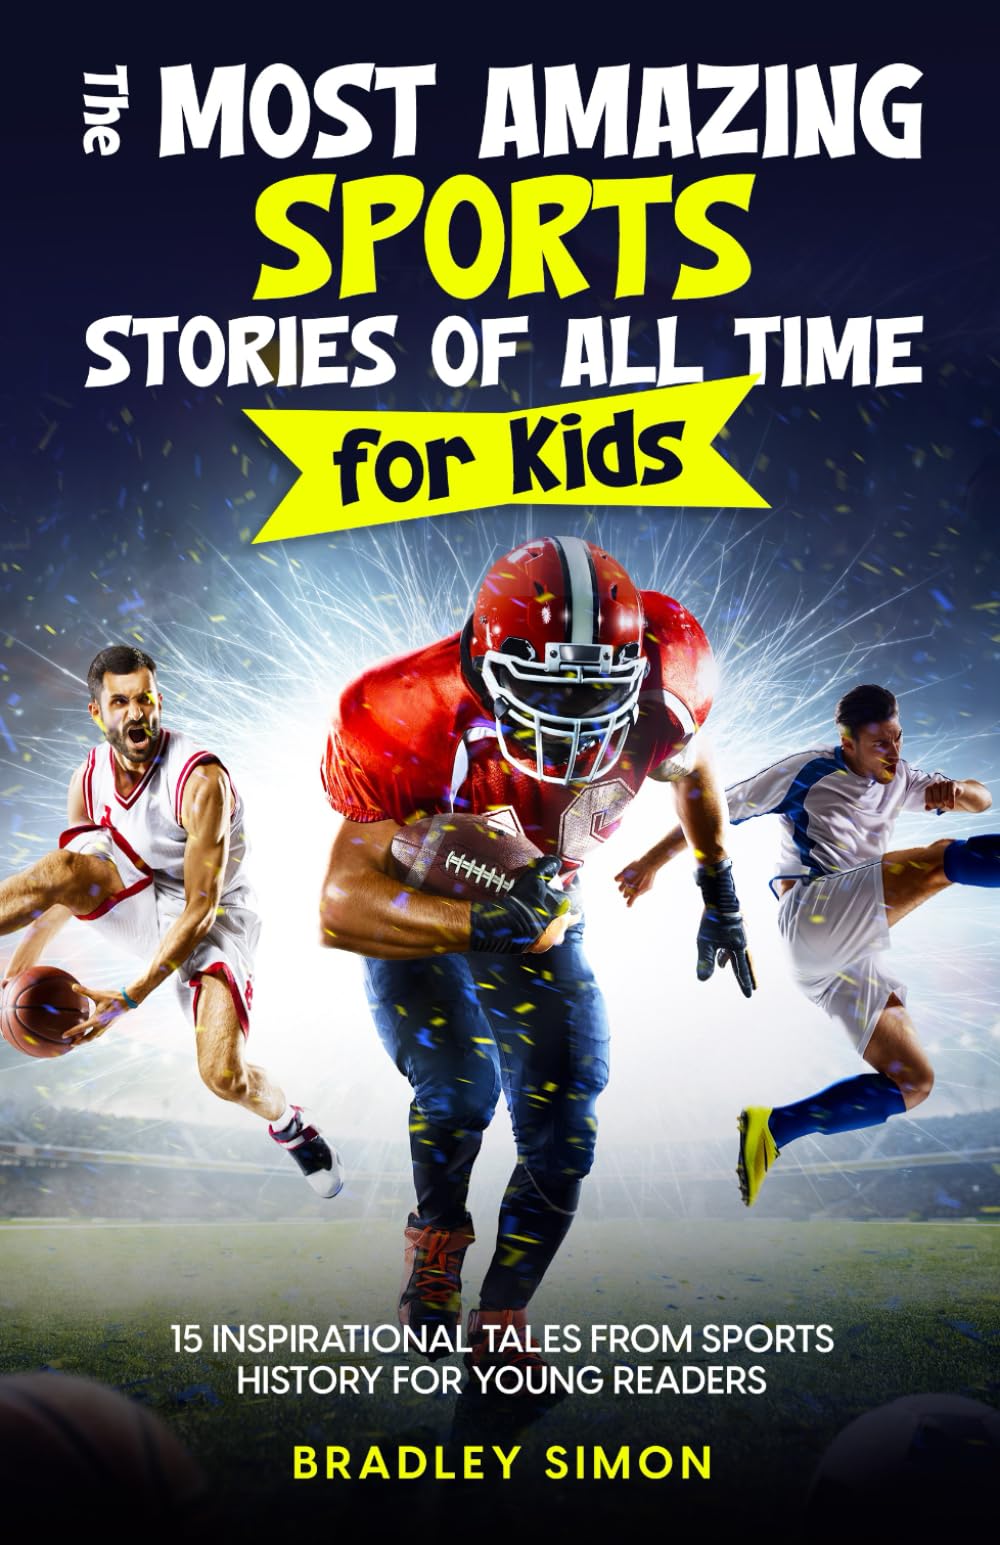 The Most Amazing Sports Stories of All Time for Kids: 15 Inspirational Tales From Sports History for Young Readers